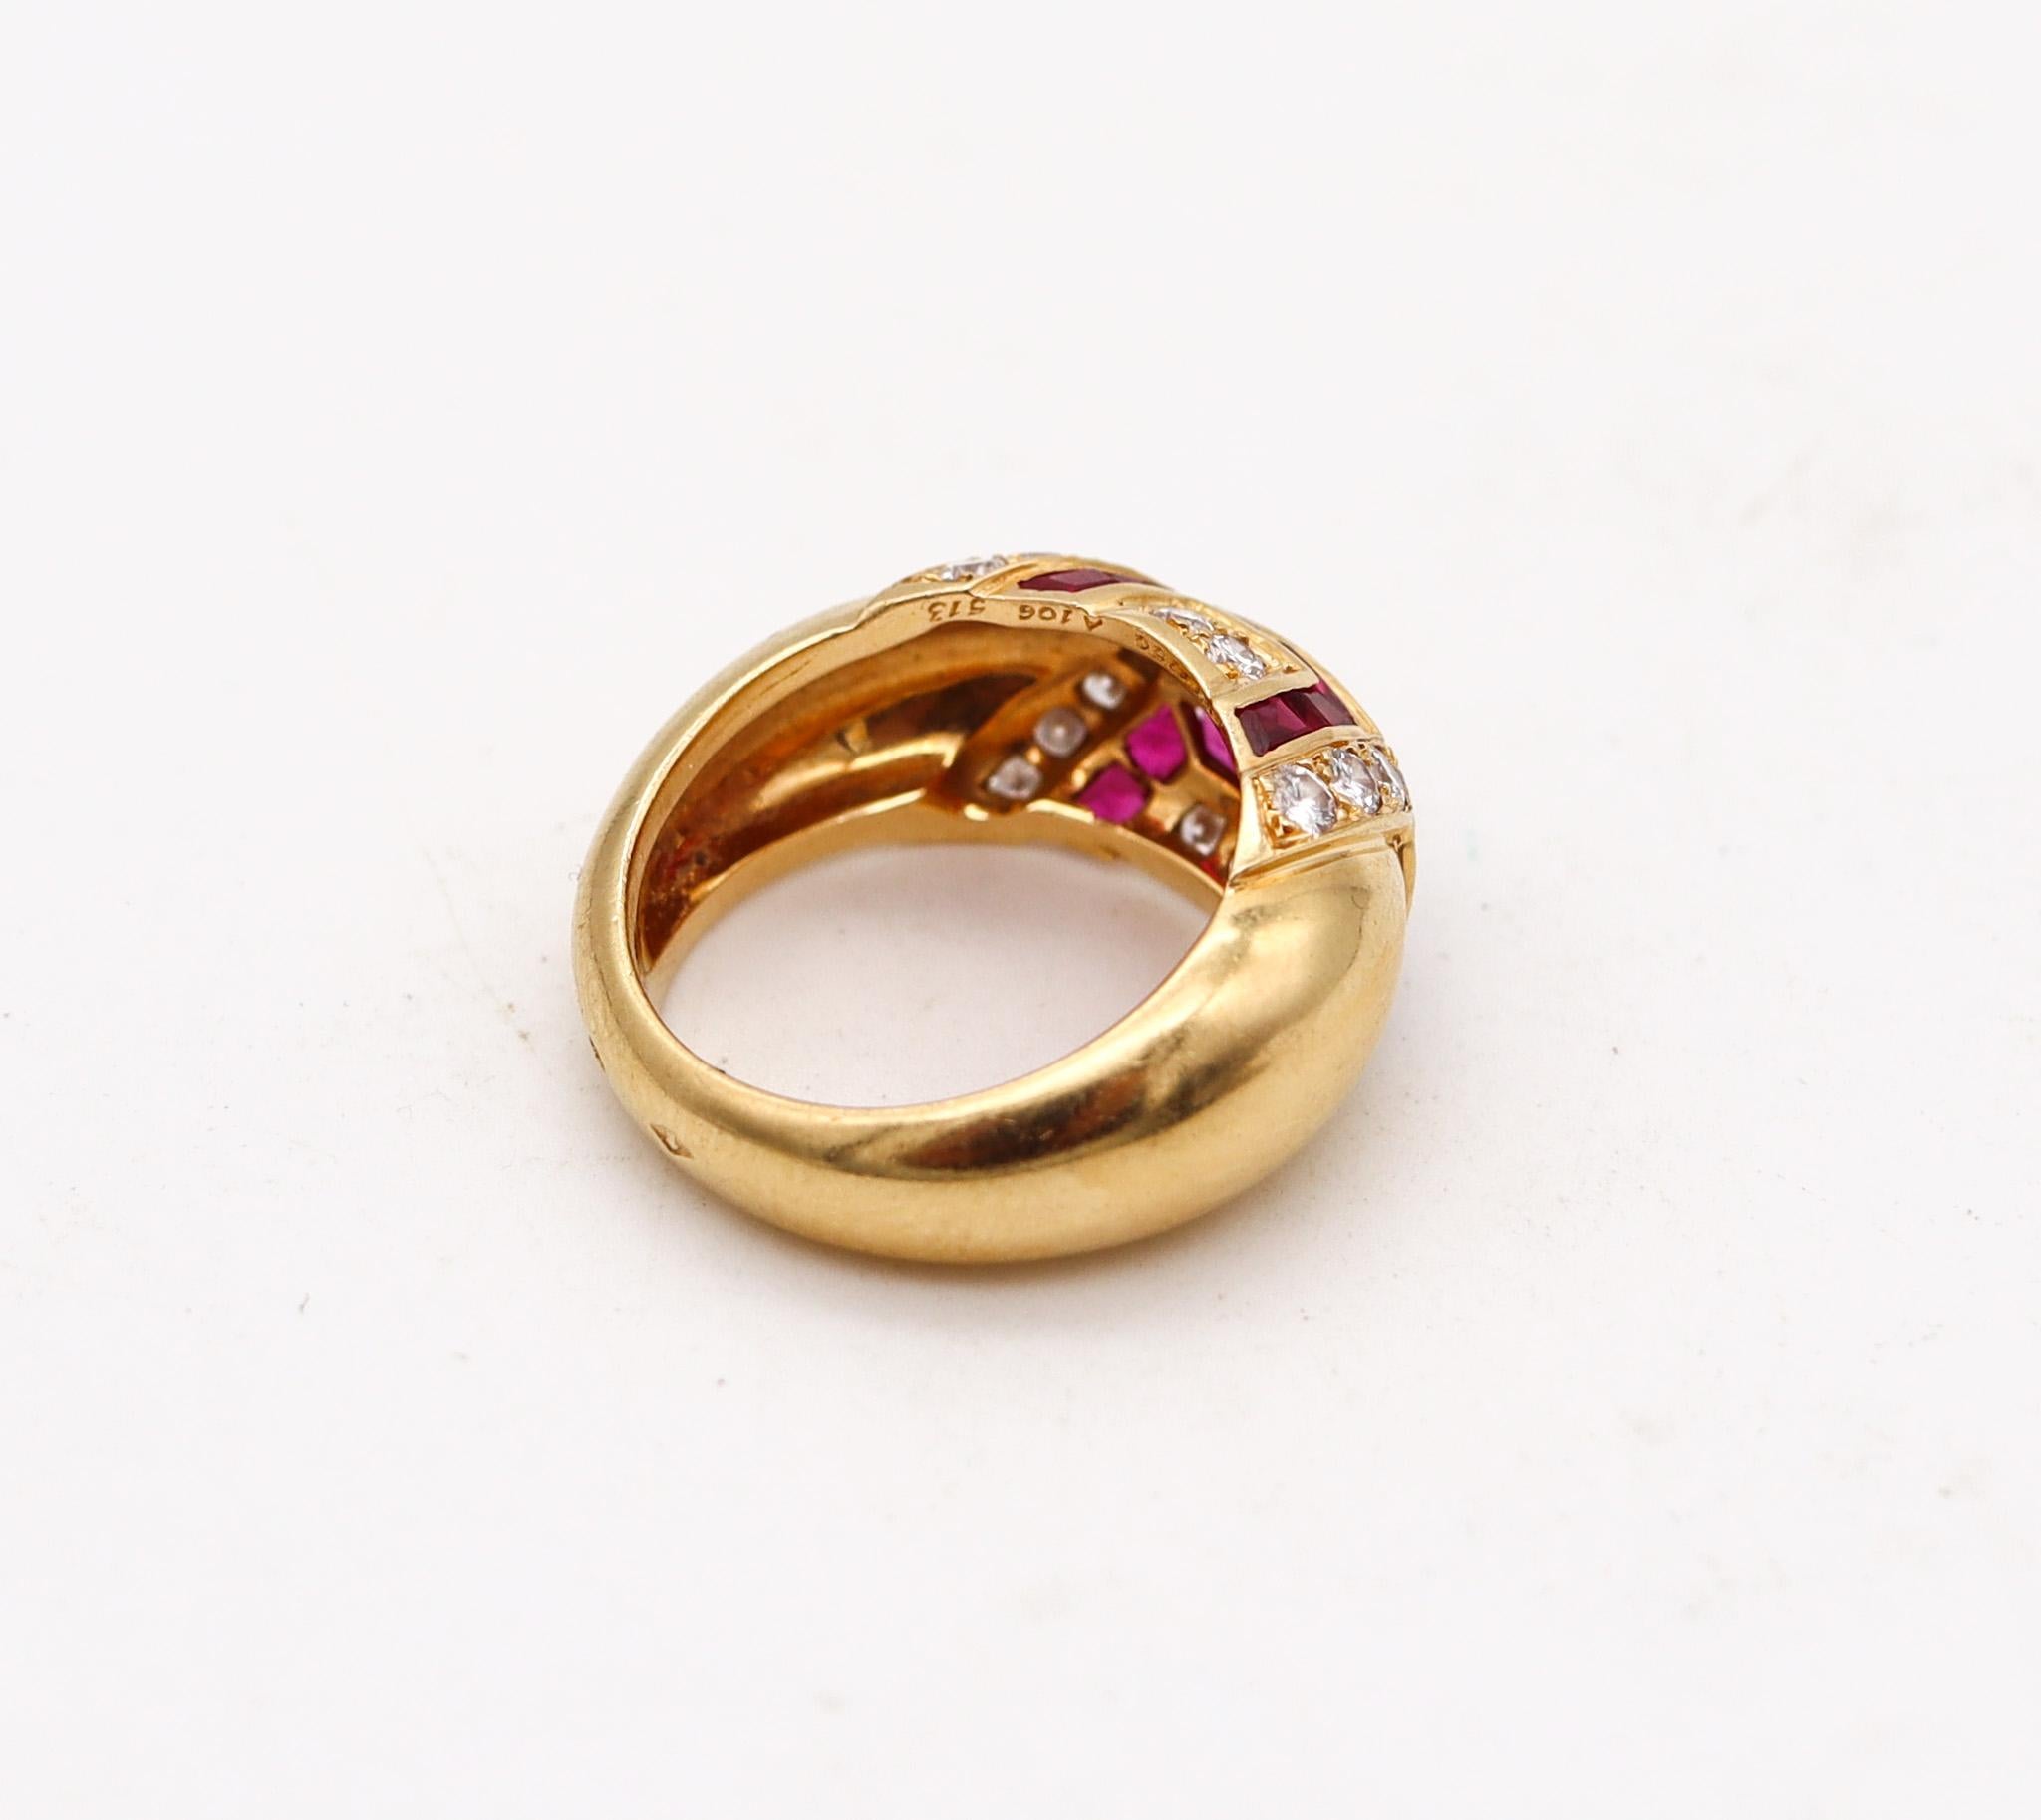 Boucheron Paris Modernist Ring In 18Kt Gold With 1.94 Ctw In Diamonds And Rubies In Excellent Condition For Sale In Miami, FL